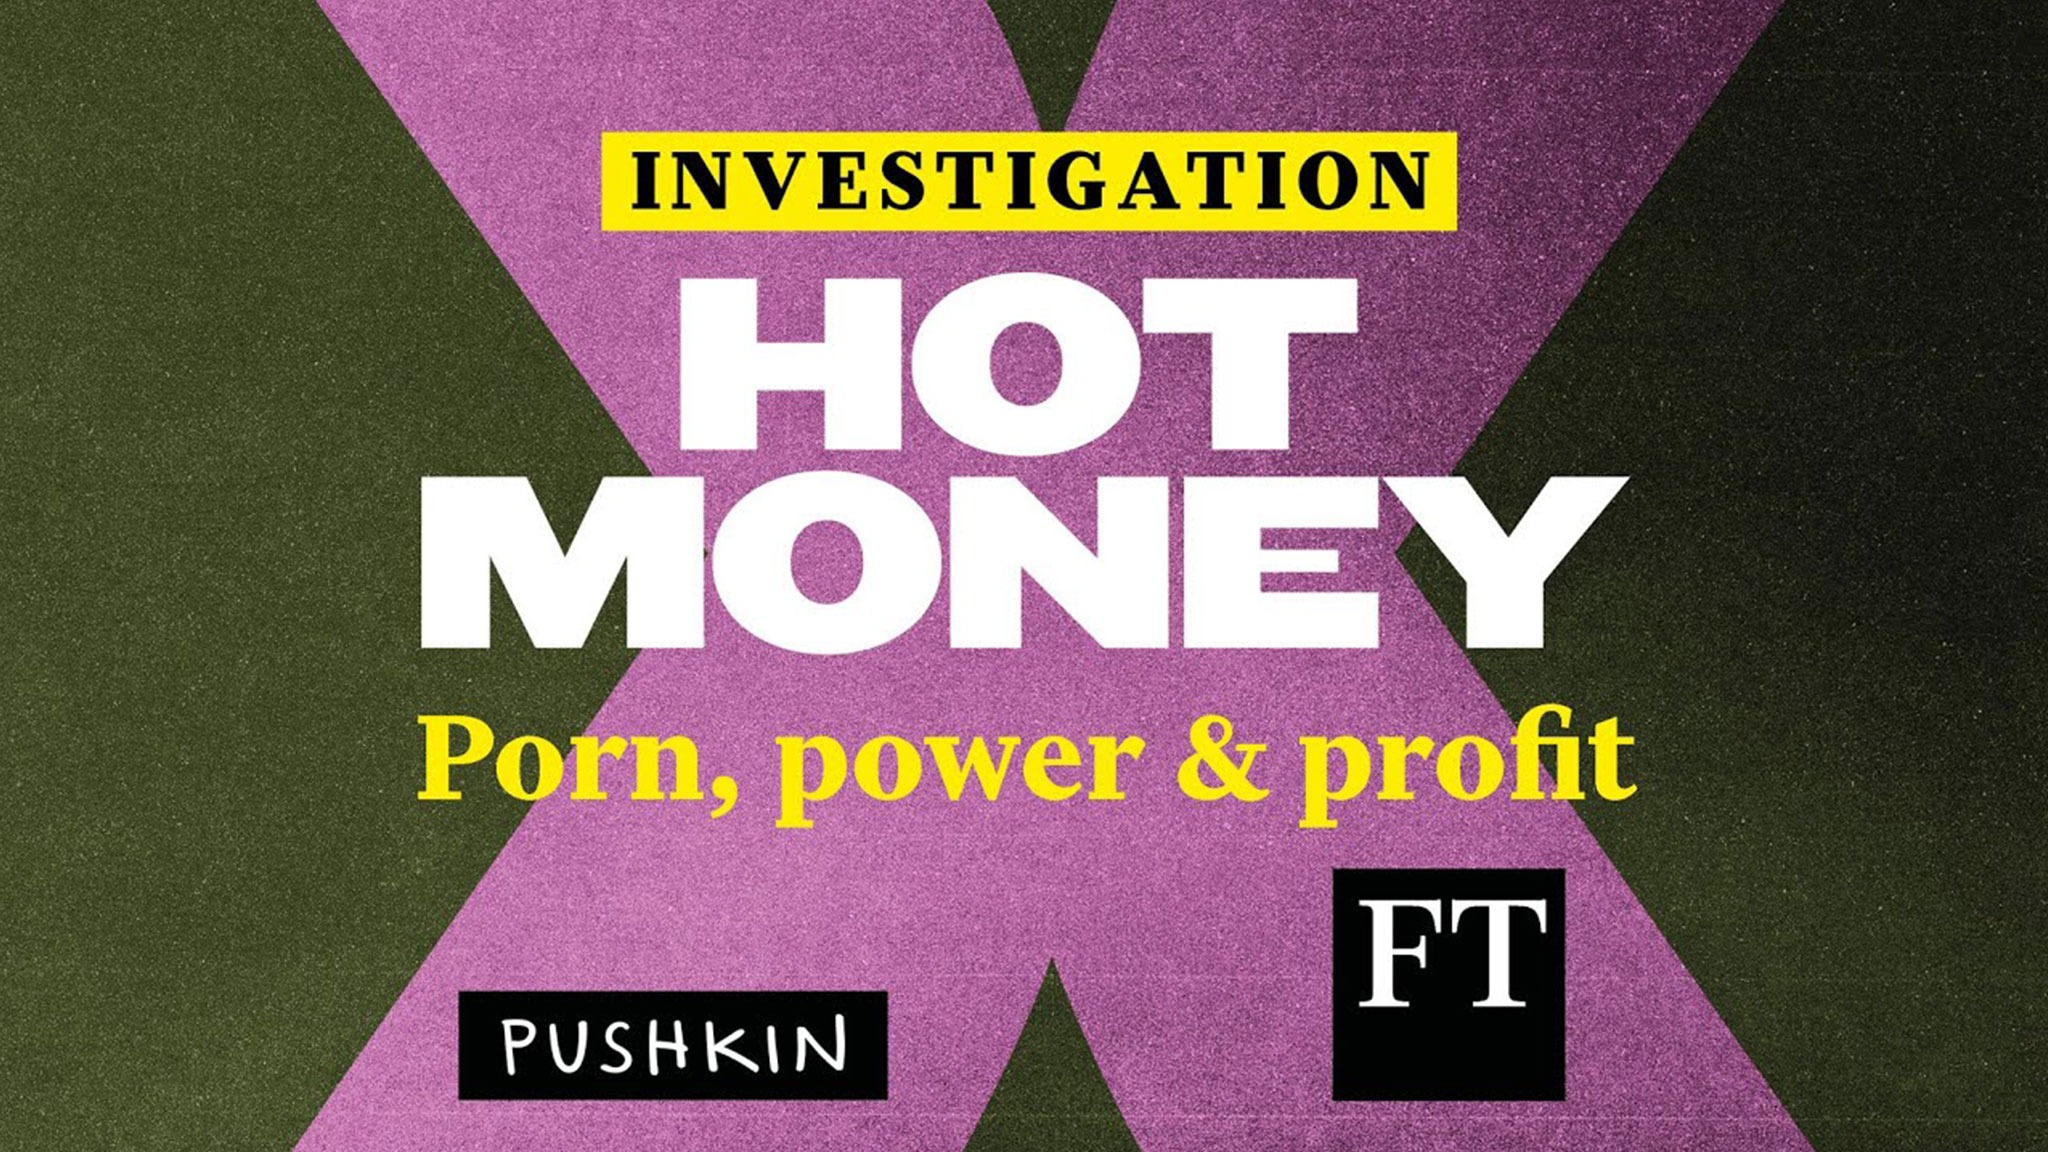 Porn meets the internet | Financial Times